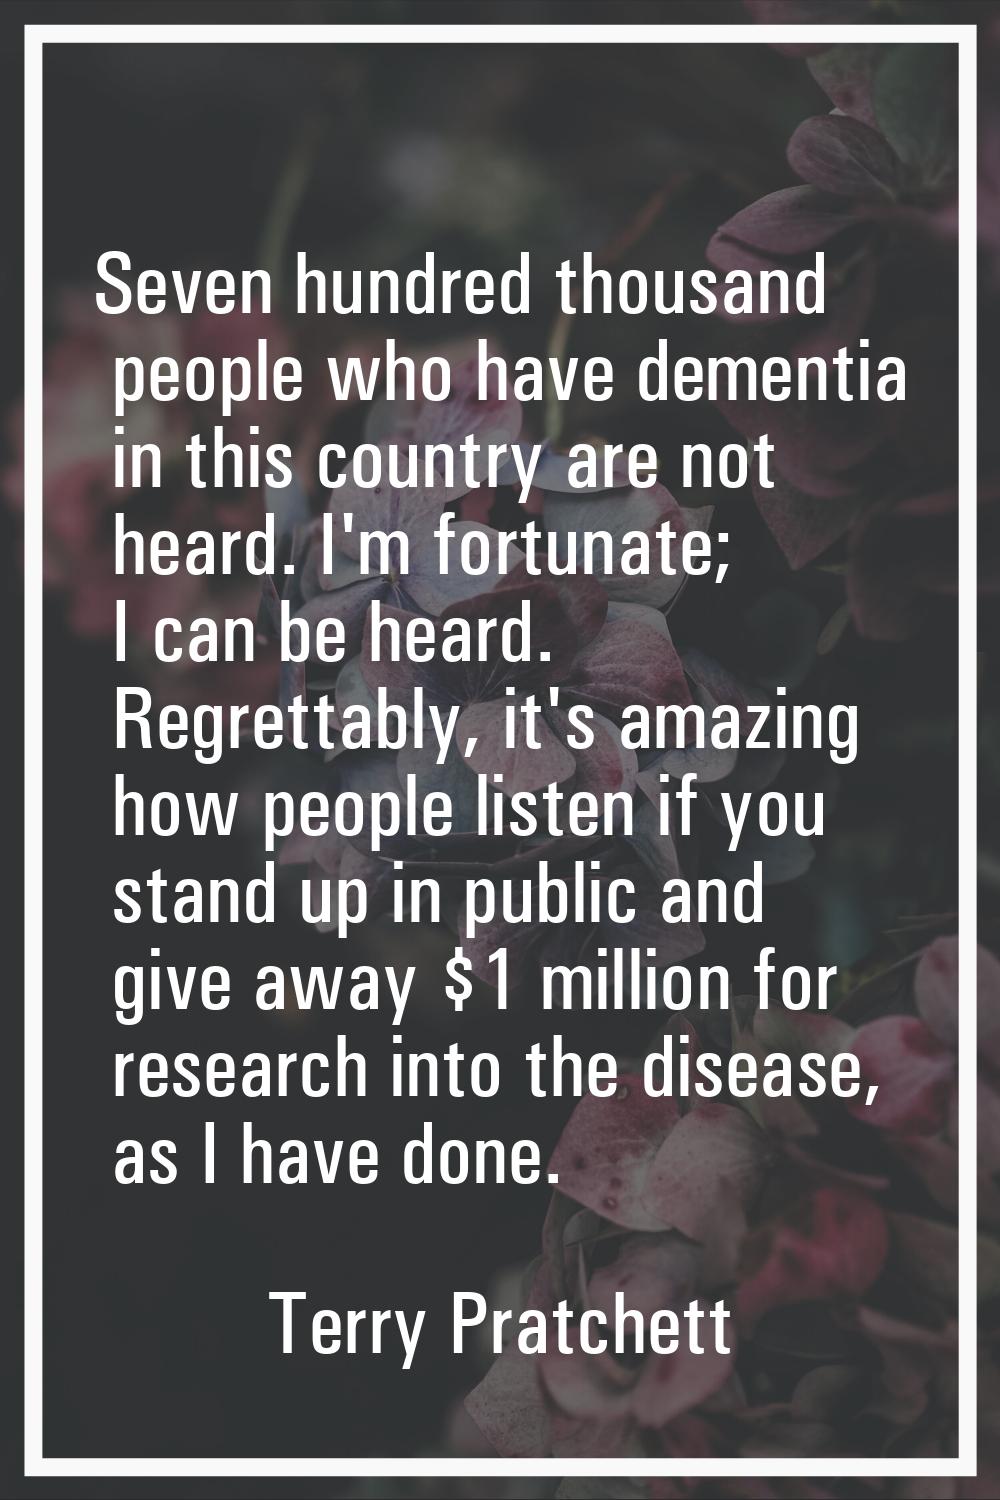 Seven hundred thousand people who have dementia in this country are not heard. I'm fortunate; I can